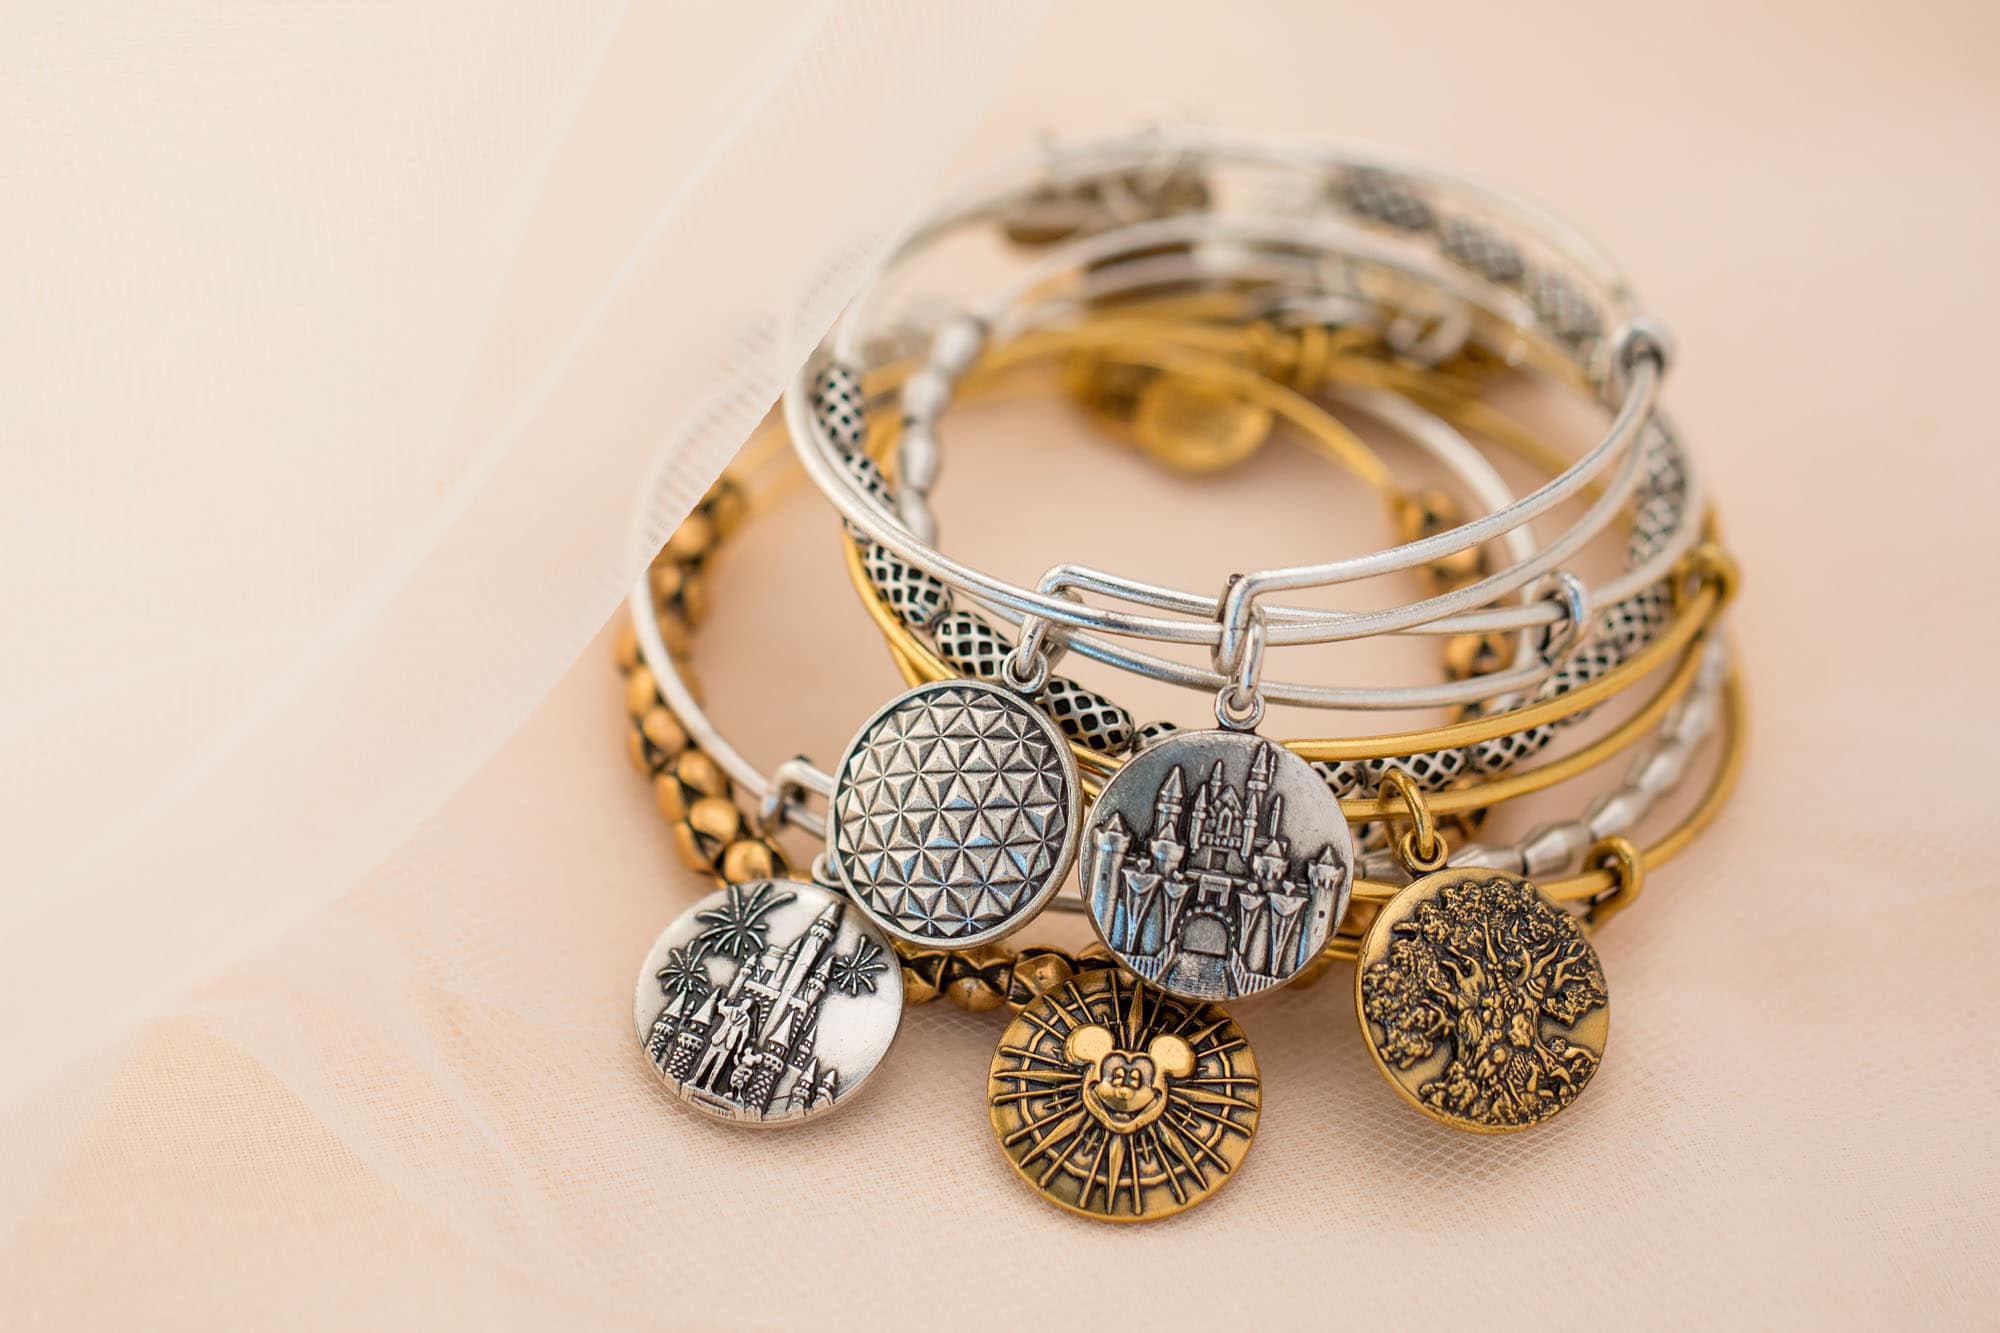 Disney Parks Blog Readers Select New ALEX AND ANI Designs for 2017